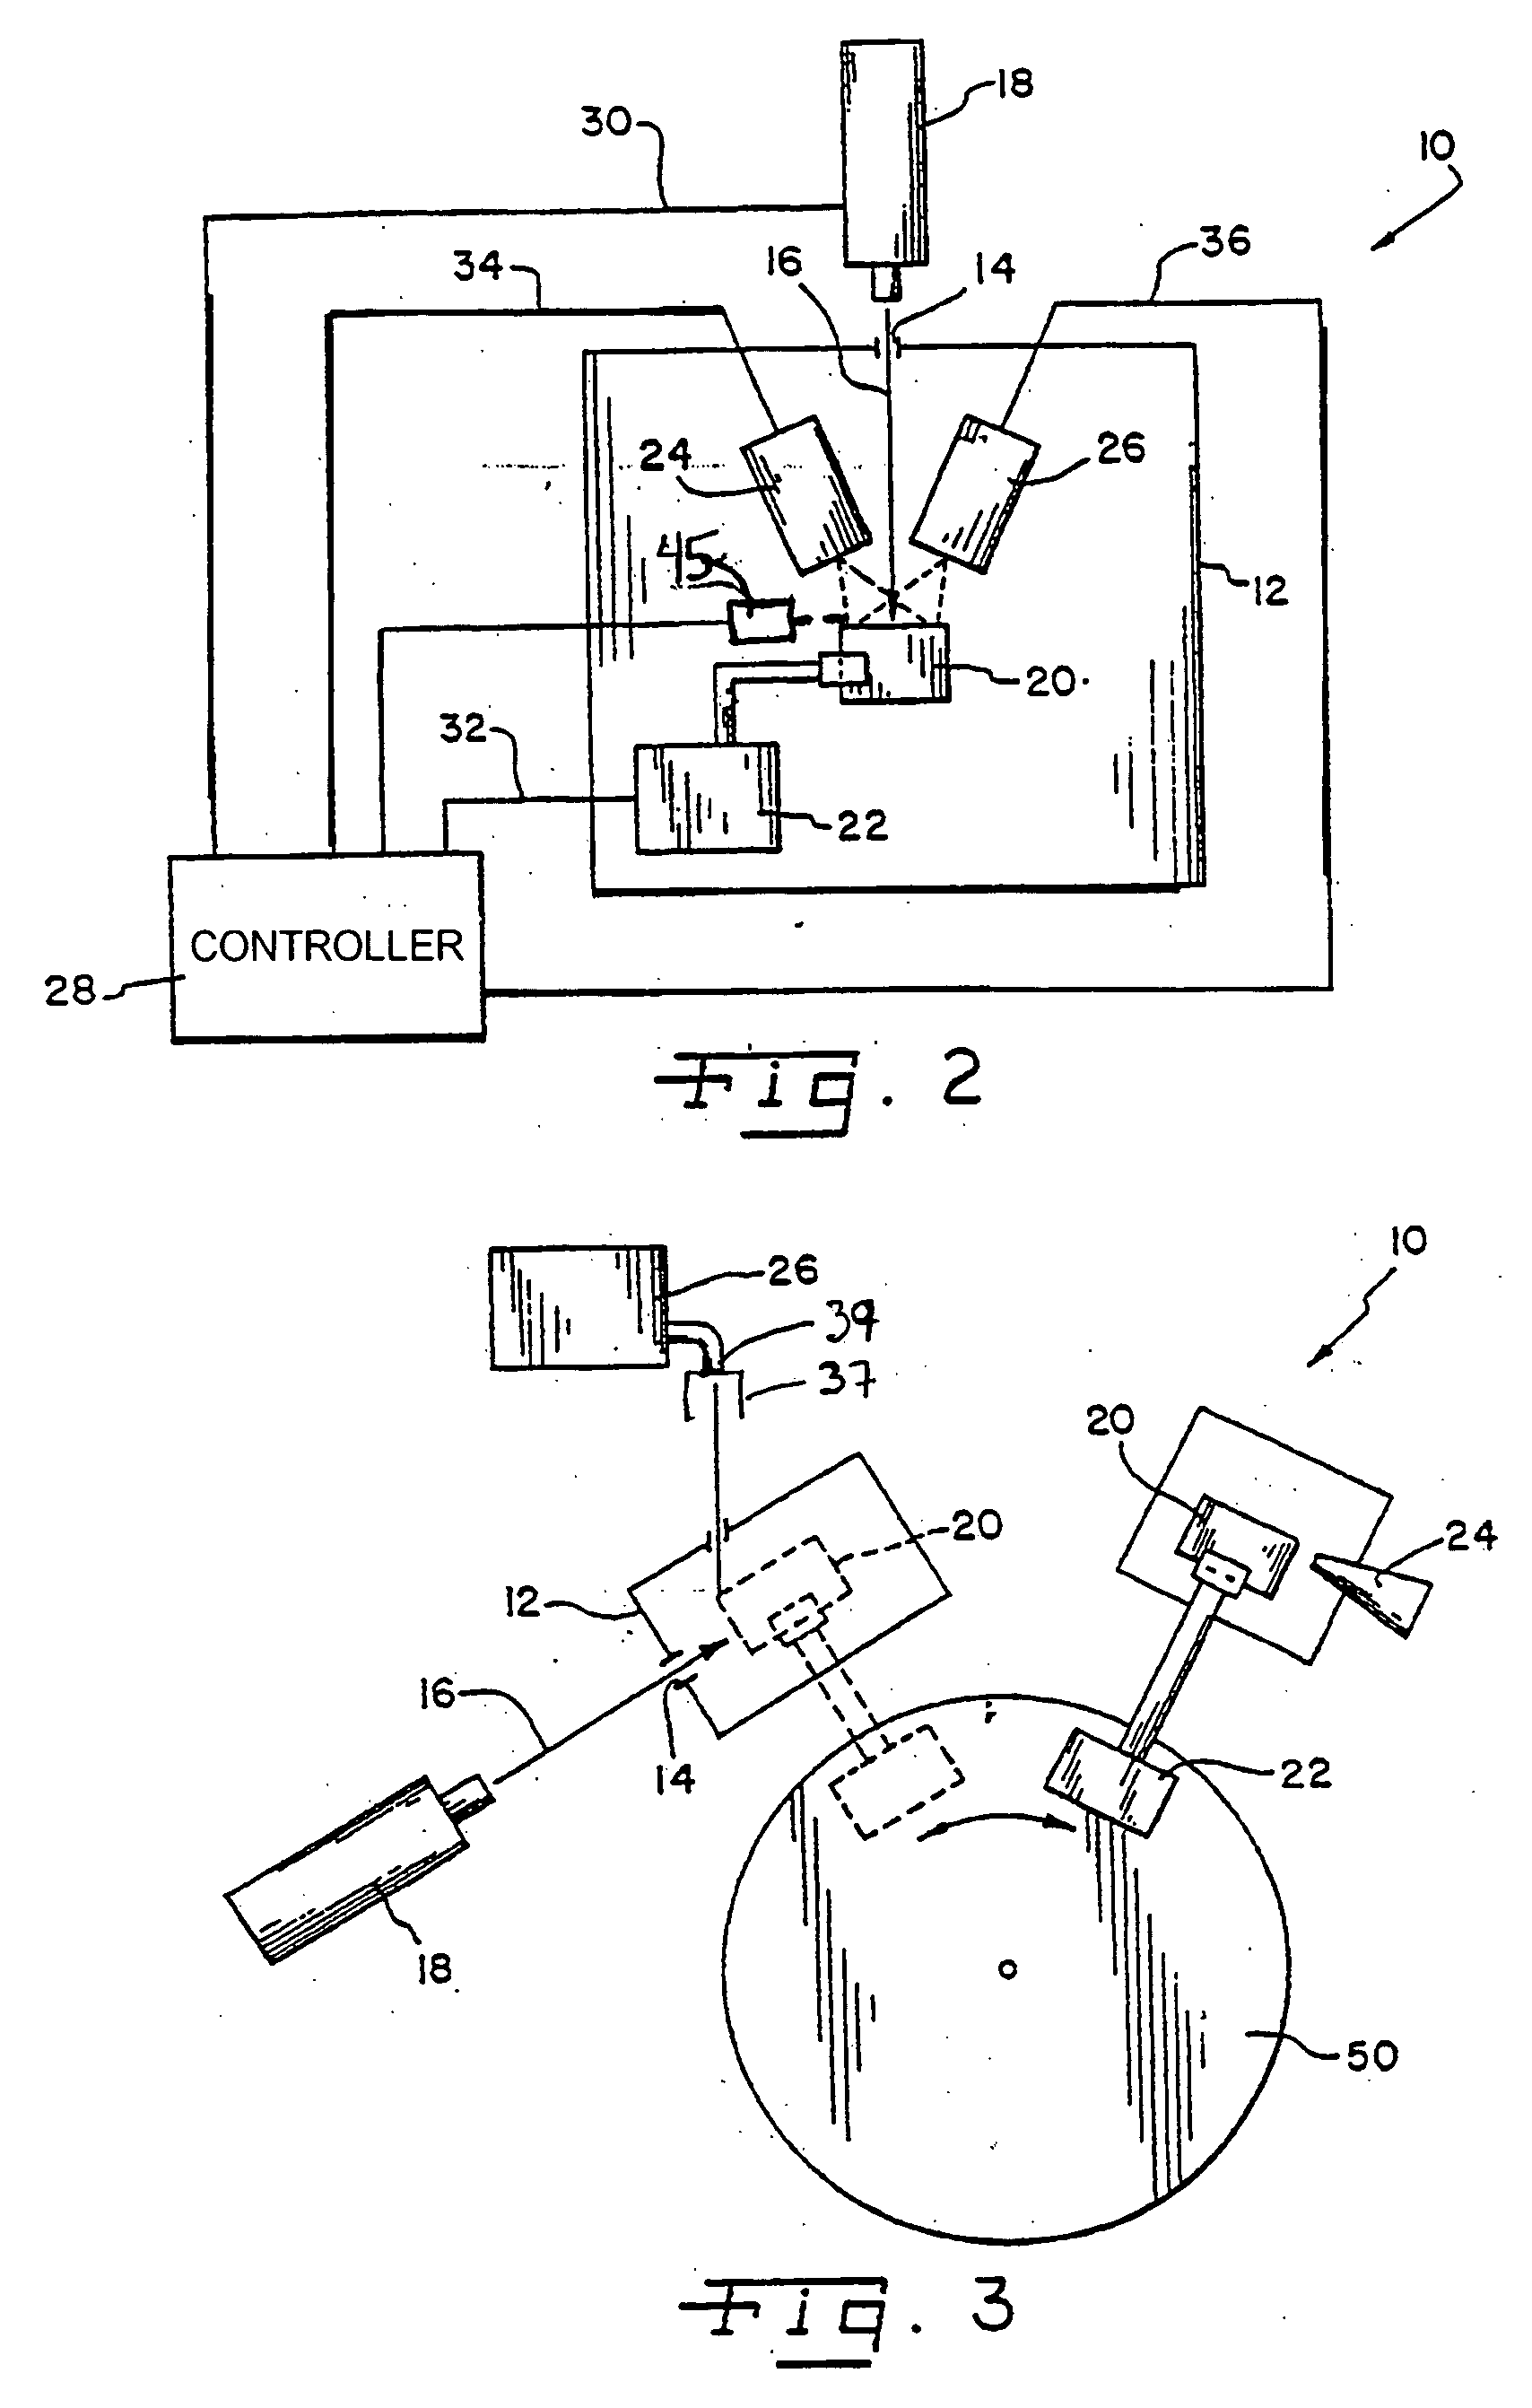 Laser peening process and apparatus using a liquid erosion-resistant opaque overlay coating